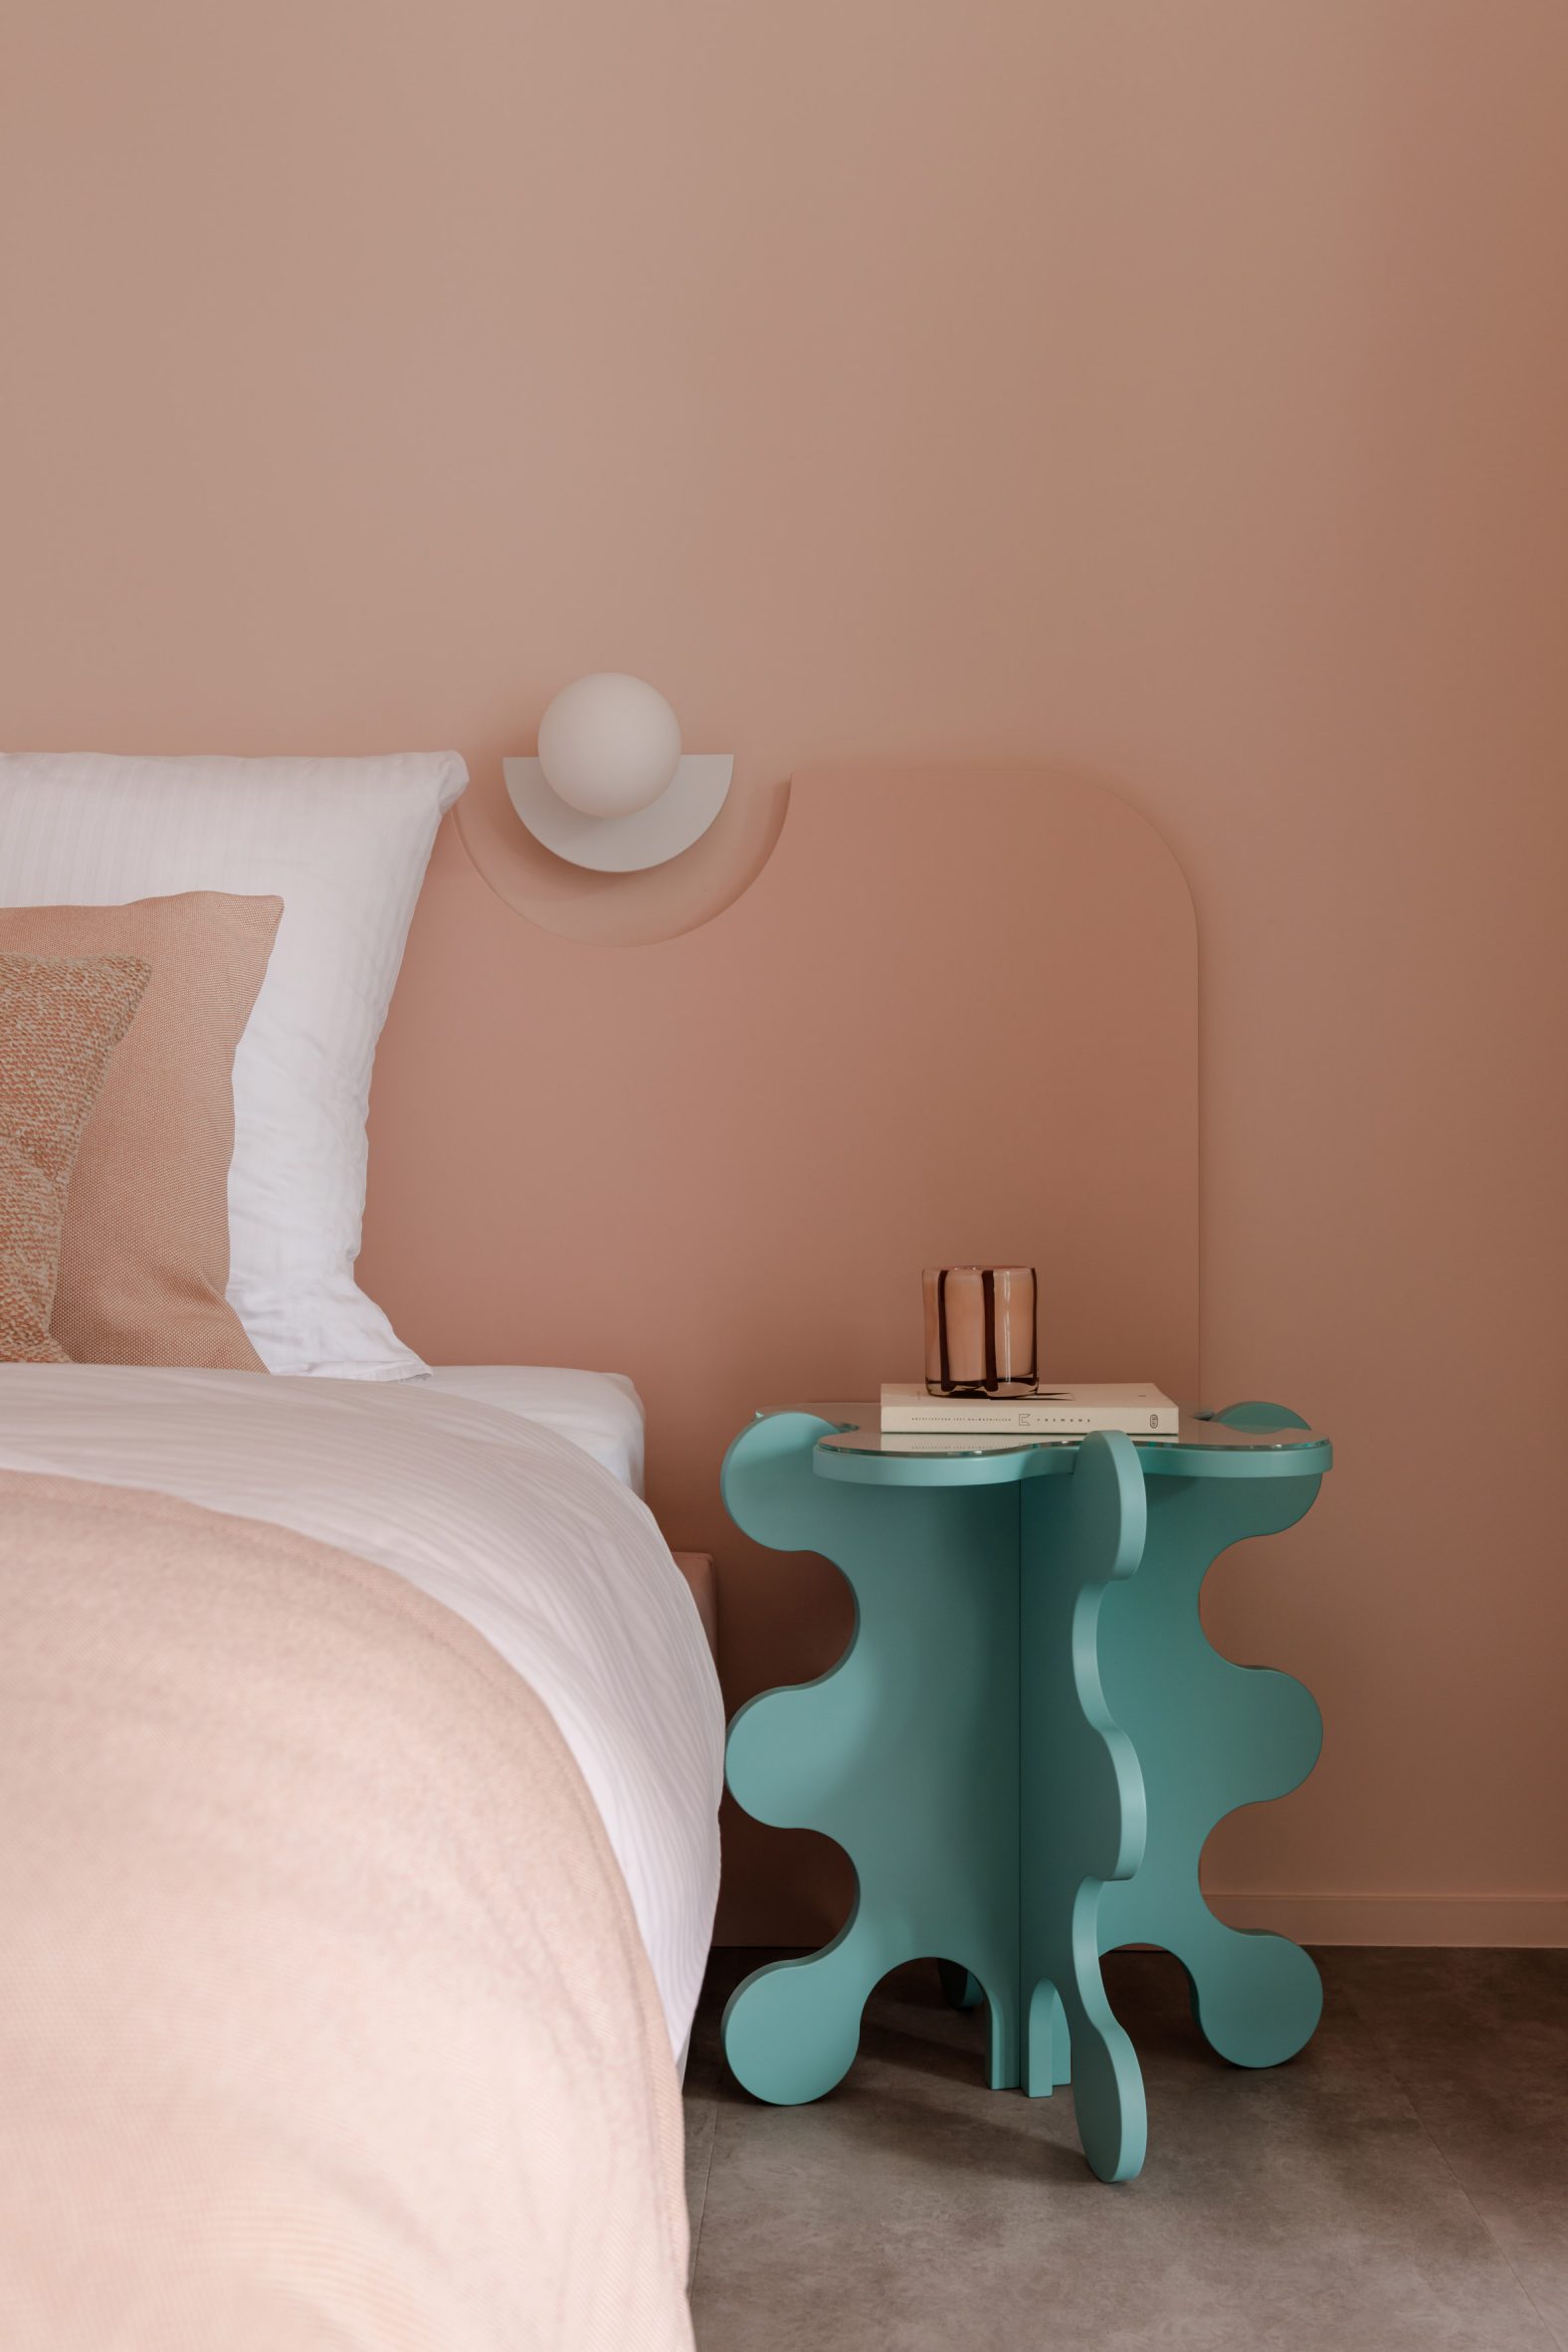 Curvy bedside table within the pink bedroom